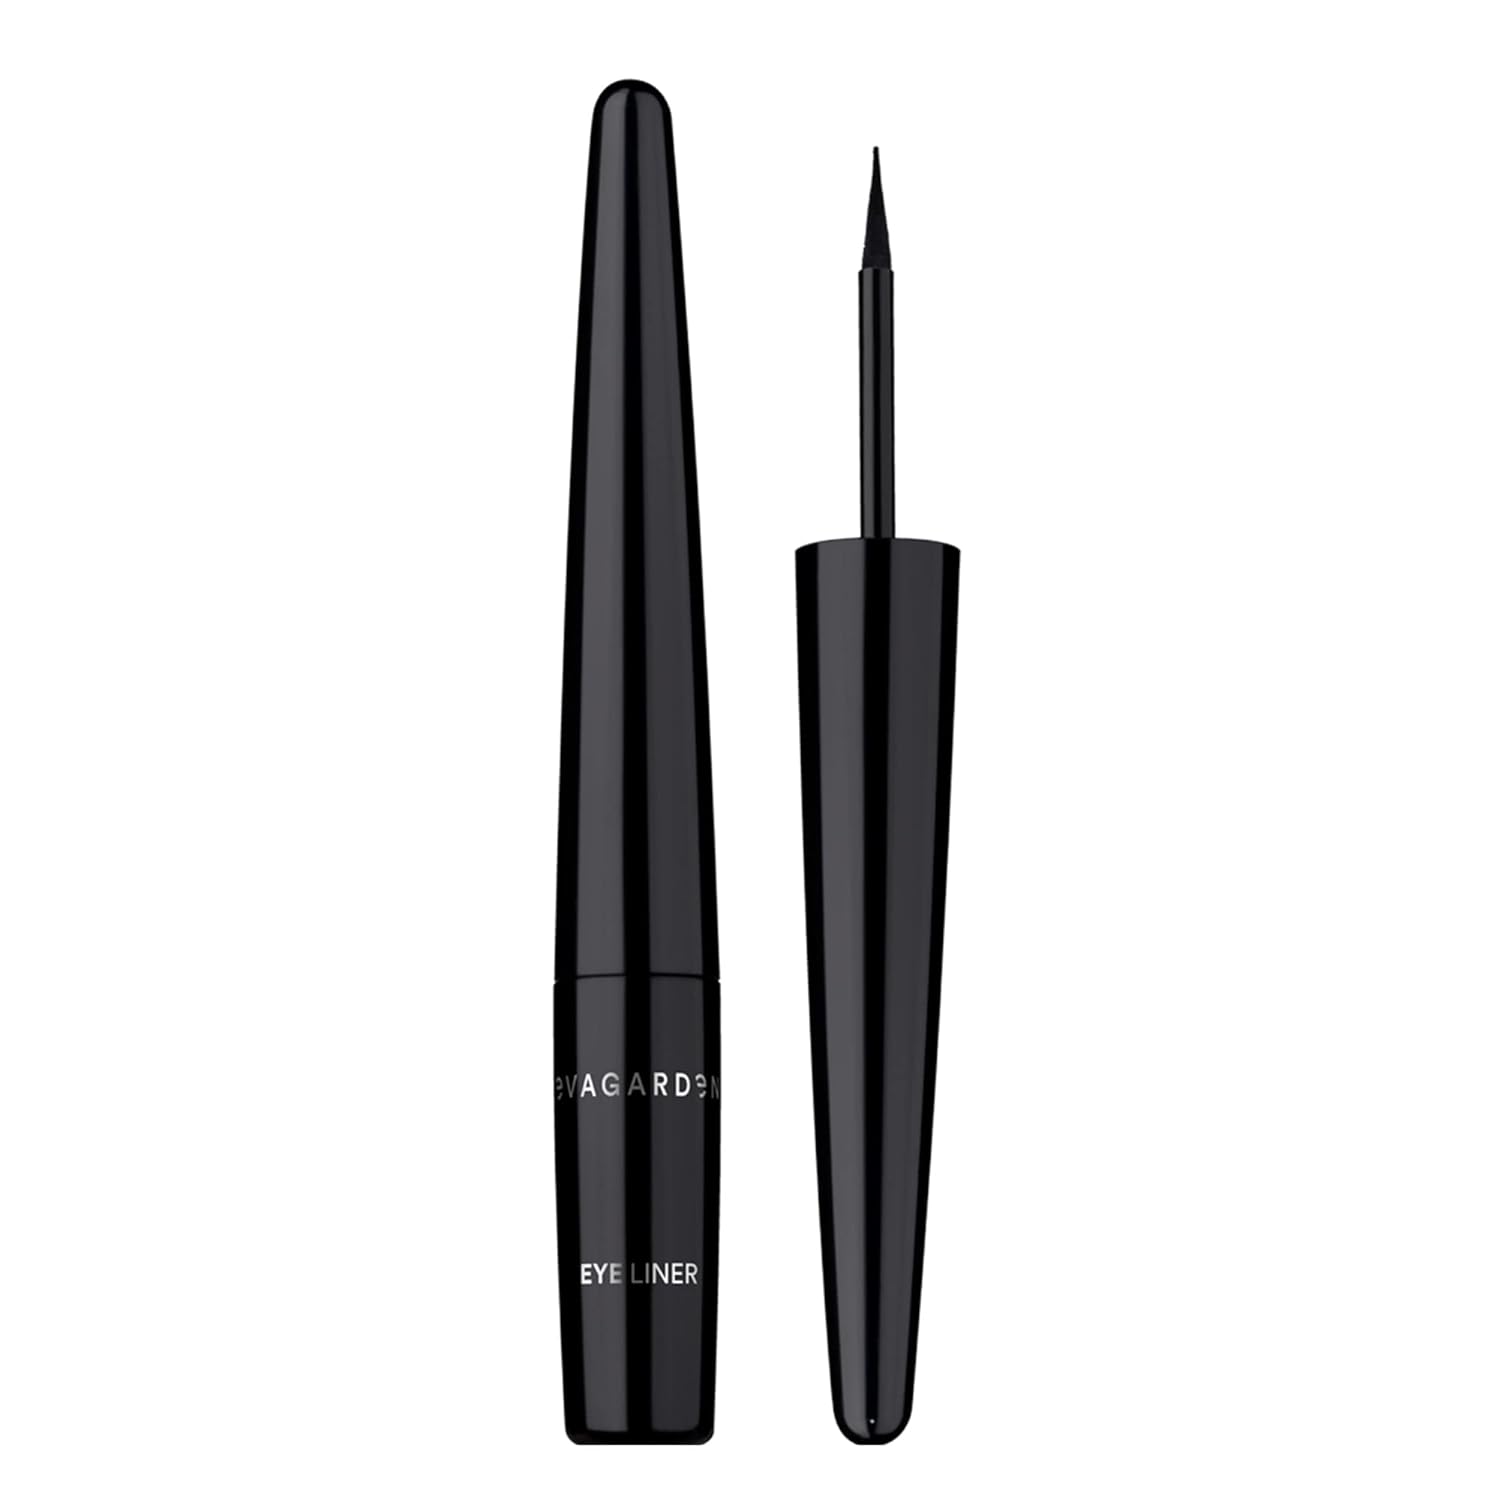 EVAGARDEN Long Lasting Eye Liner - Liquid Formula with Thin Applicator for Precise, Quick Makeup - Emphasize Your Look with Graphics - Set Curves from Light to Dramatic - 01 Black - 0.05